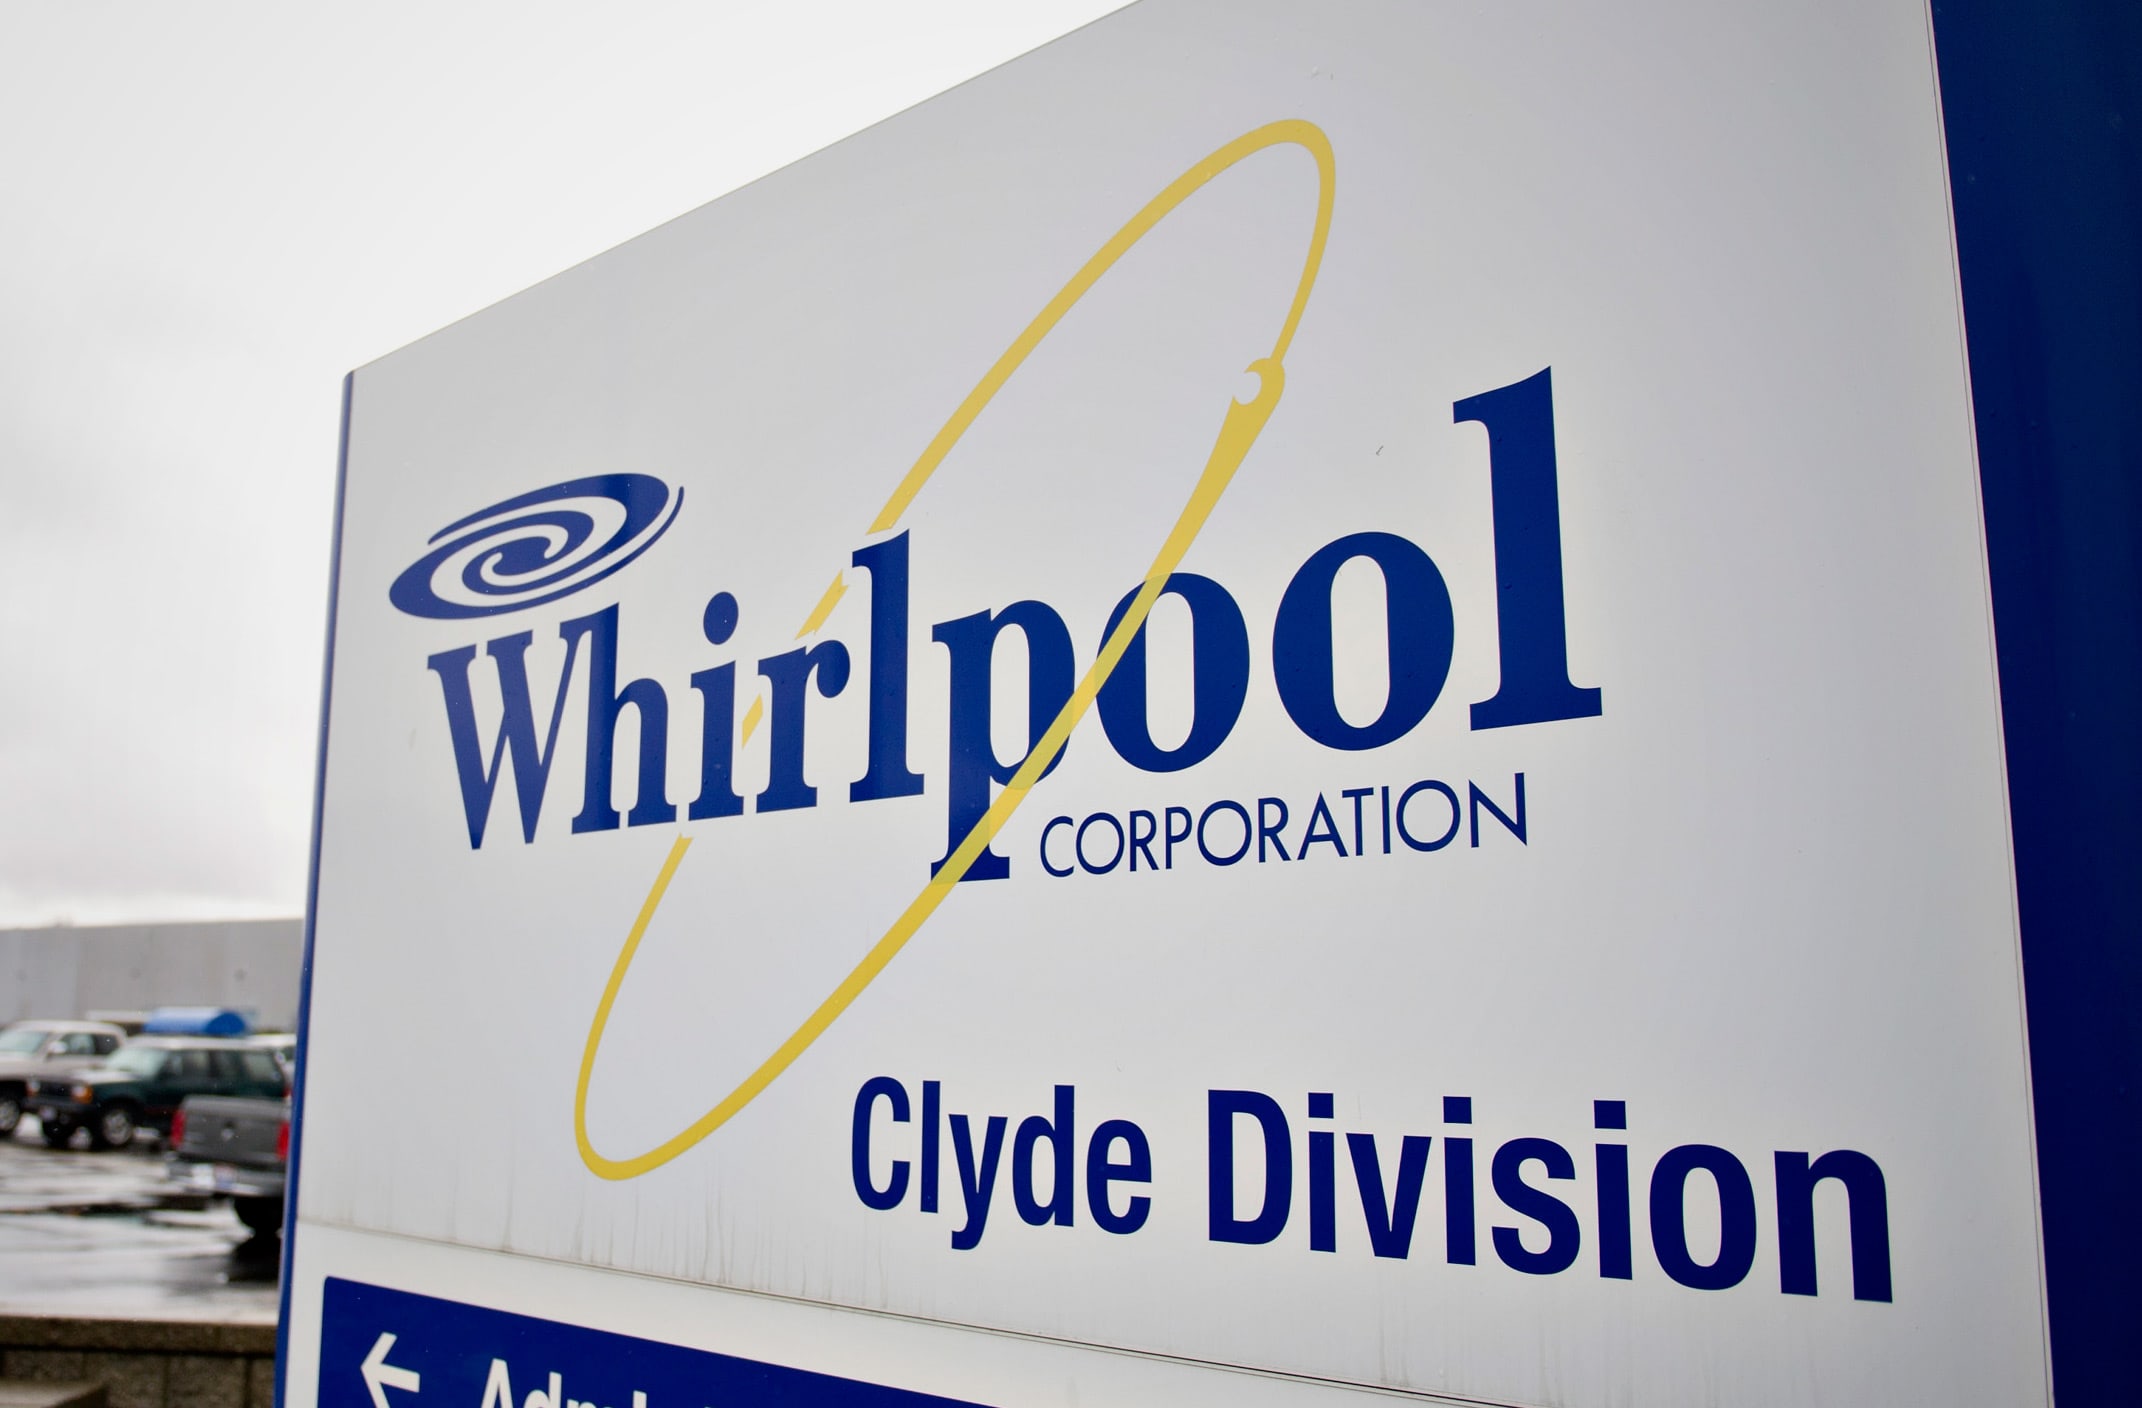 Who is the CEO of Whirlpool?